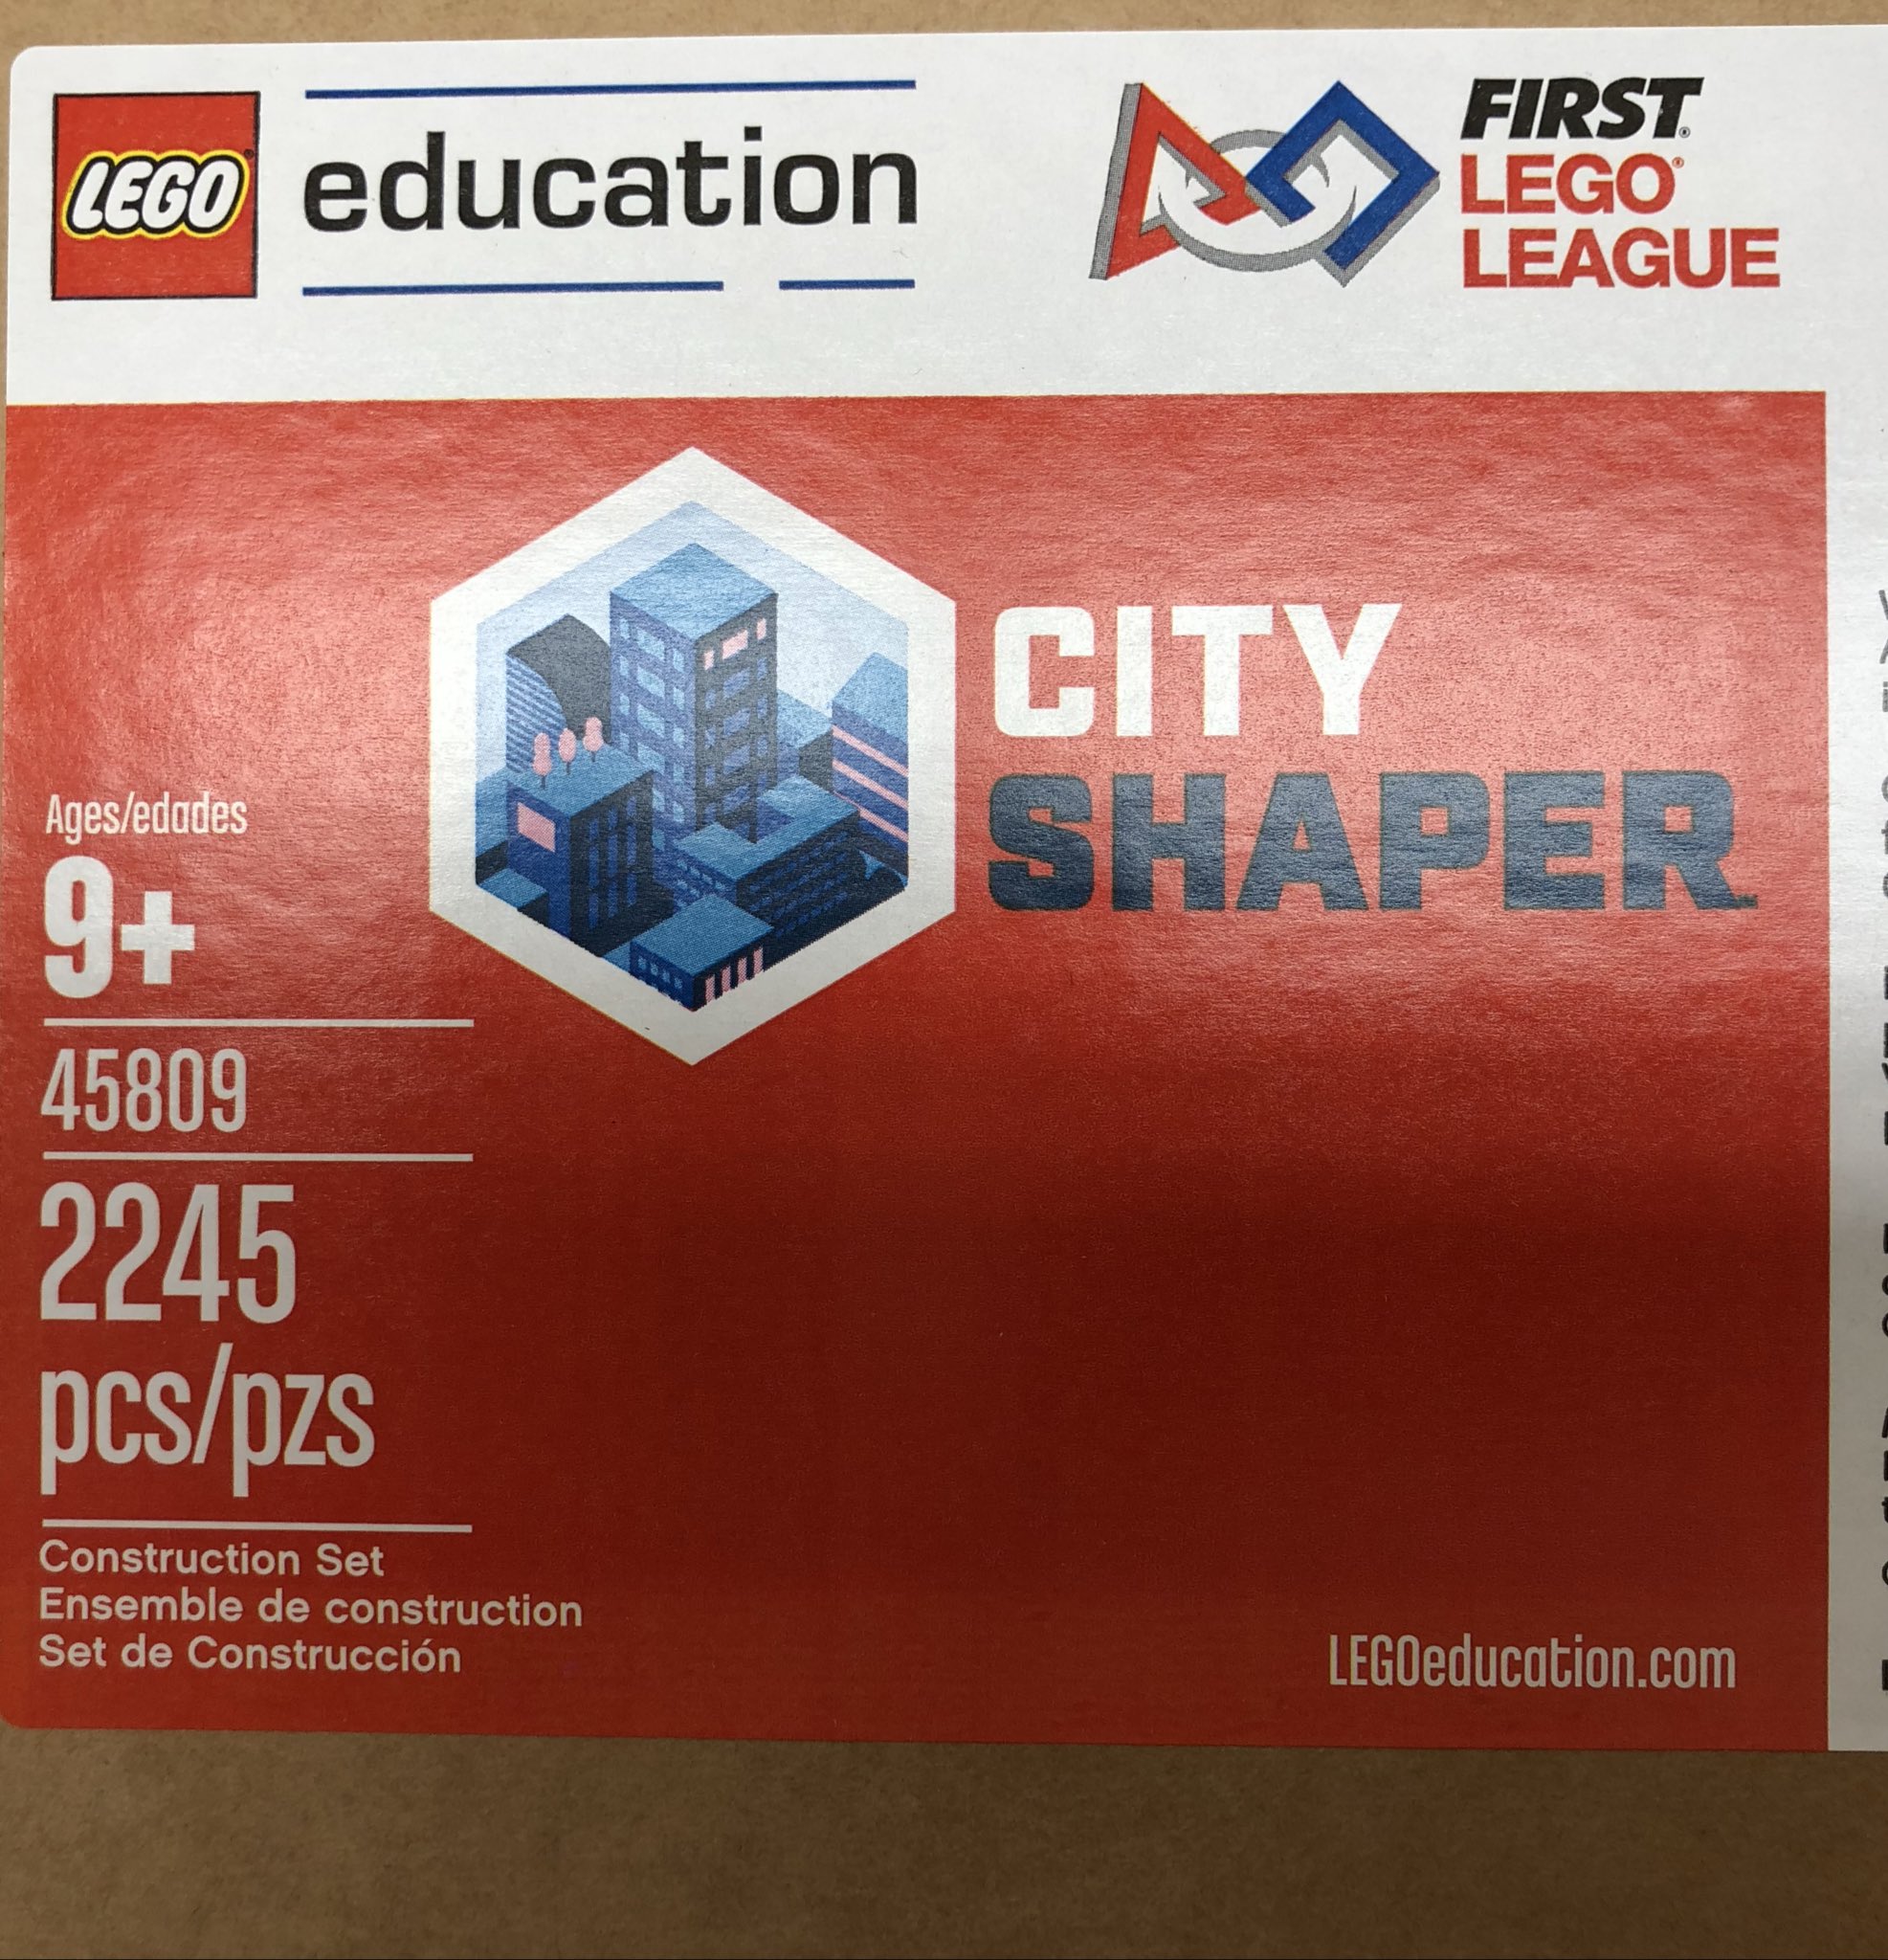 Greg Kent on Twitter: "Look what came in the mail!! @kailuaes Honubots are excited for the @LEGO_Education @firstlegoleague #cityshaper challenge! #Confidence #Corevalues #Innovation #Criticalthinking #Creativity #Collaboration ...